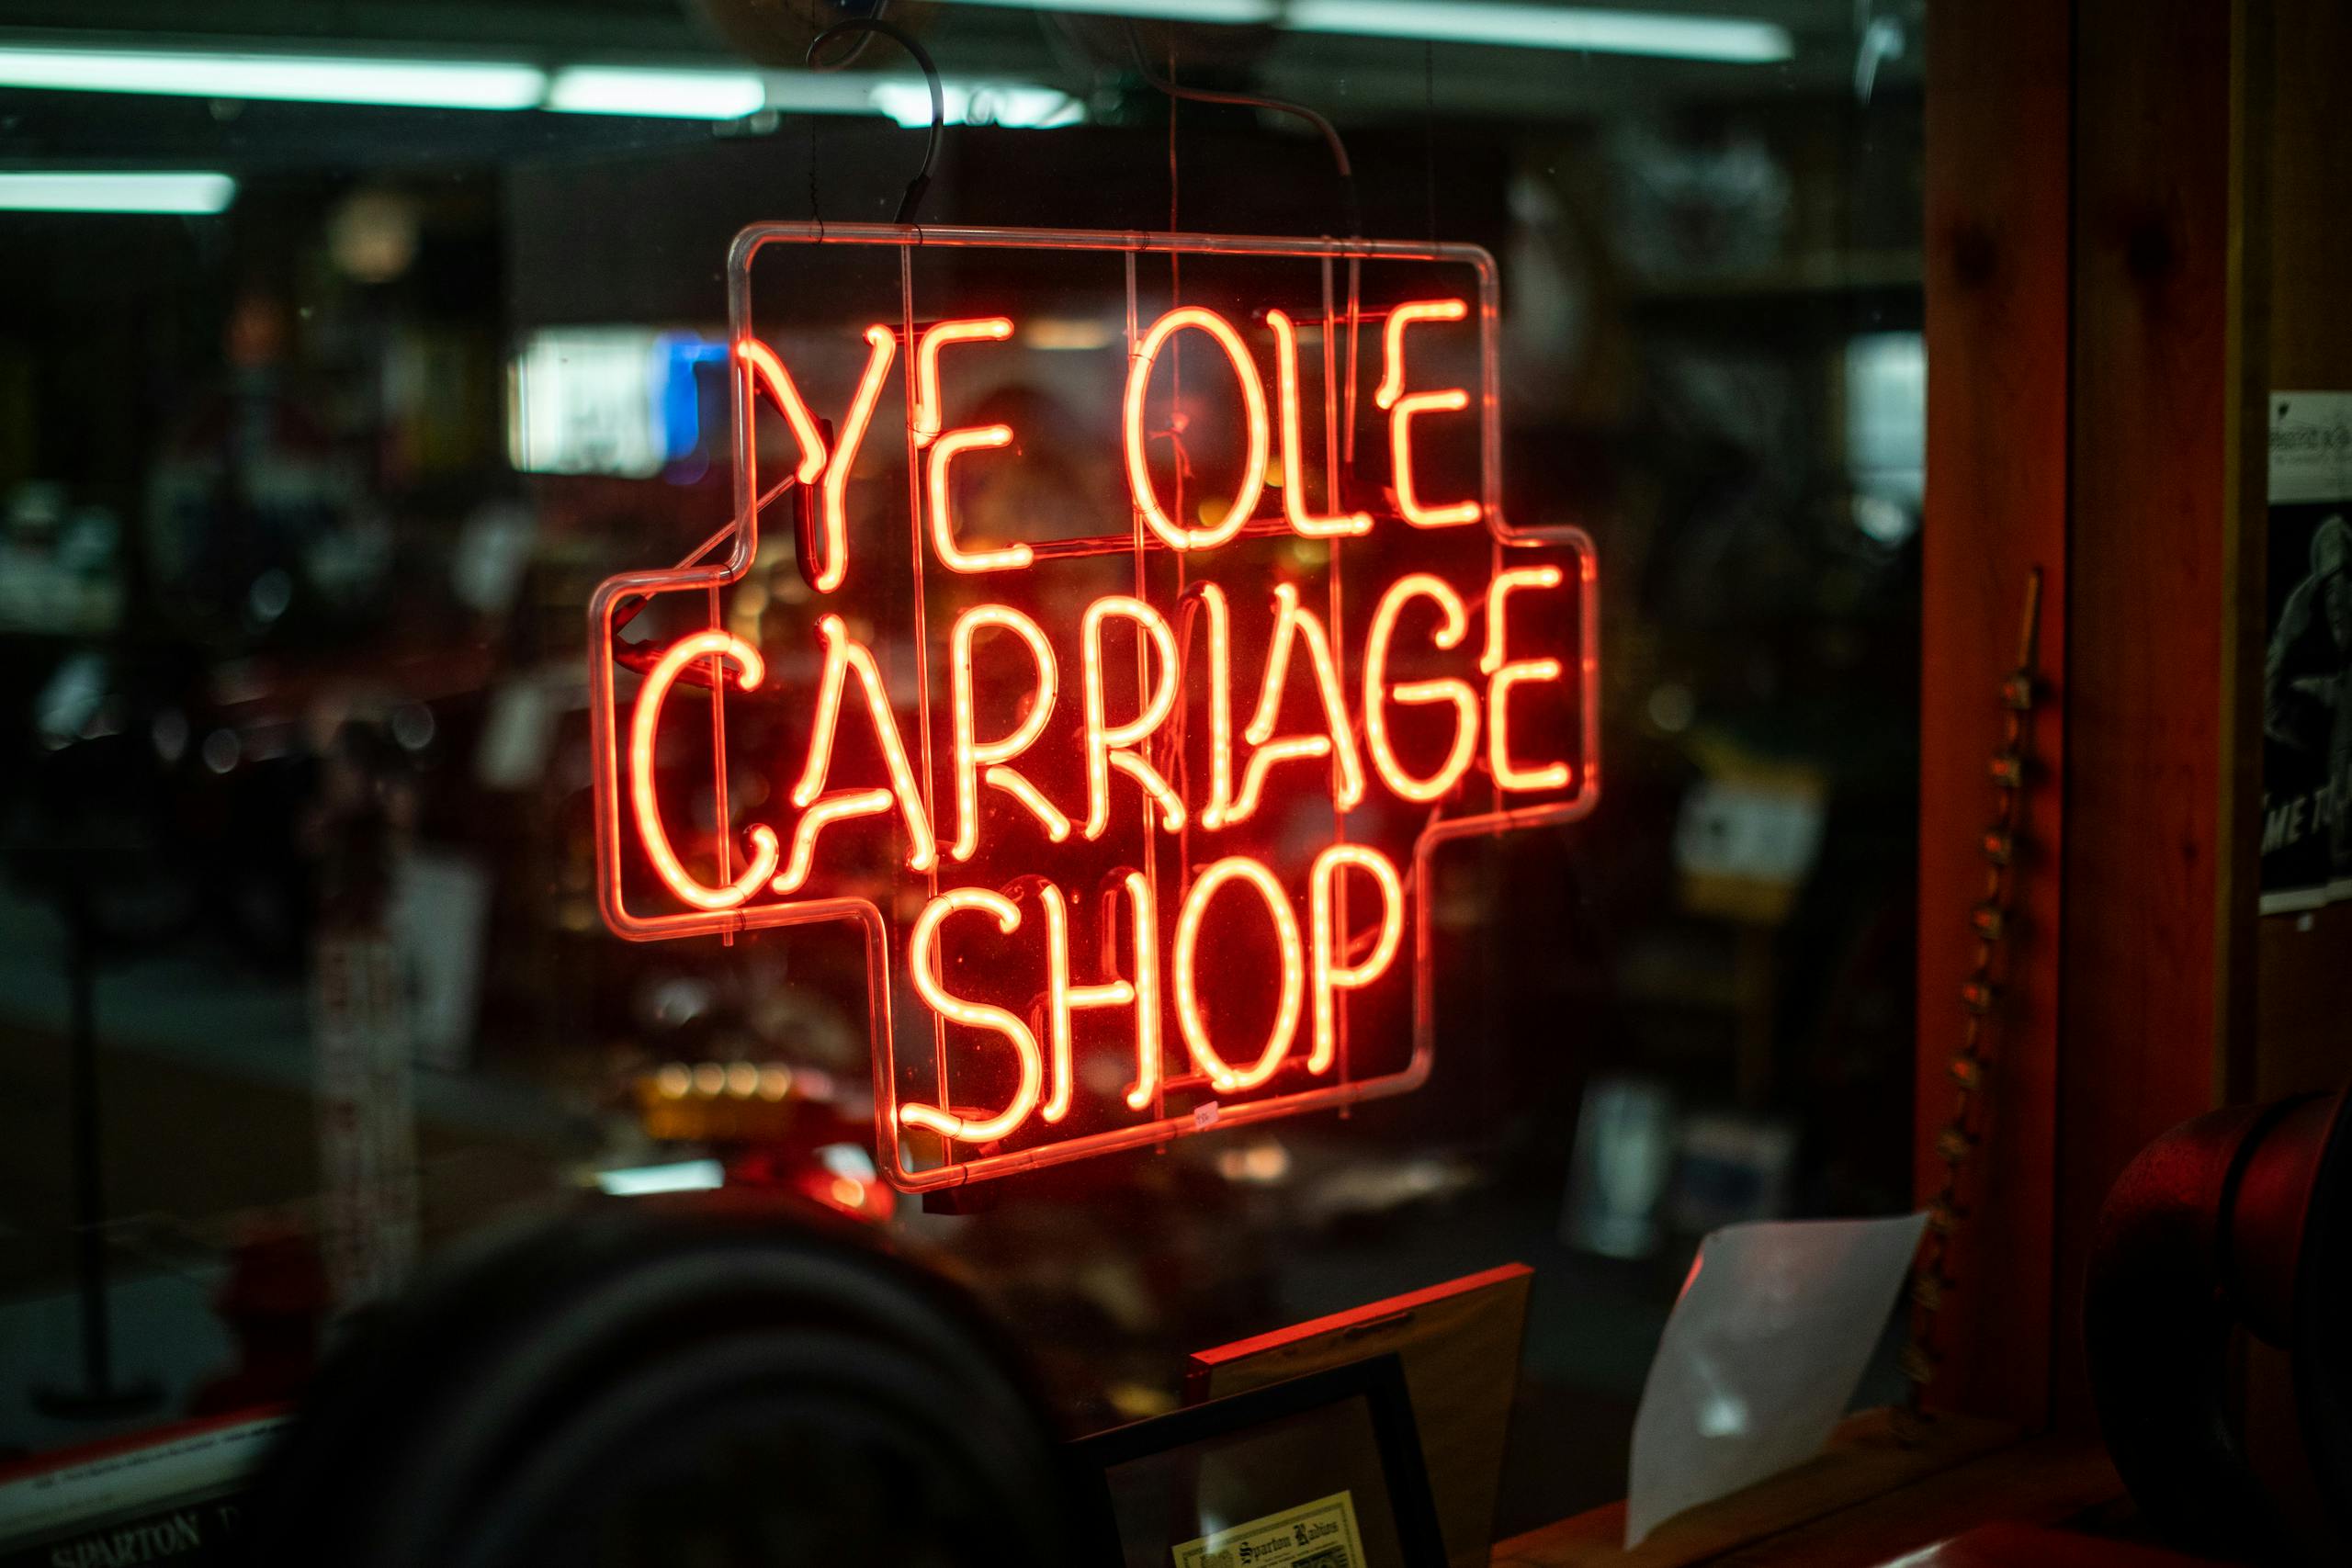 Ye Olde Carriage Shop neon sign